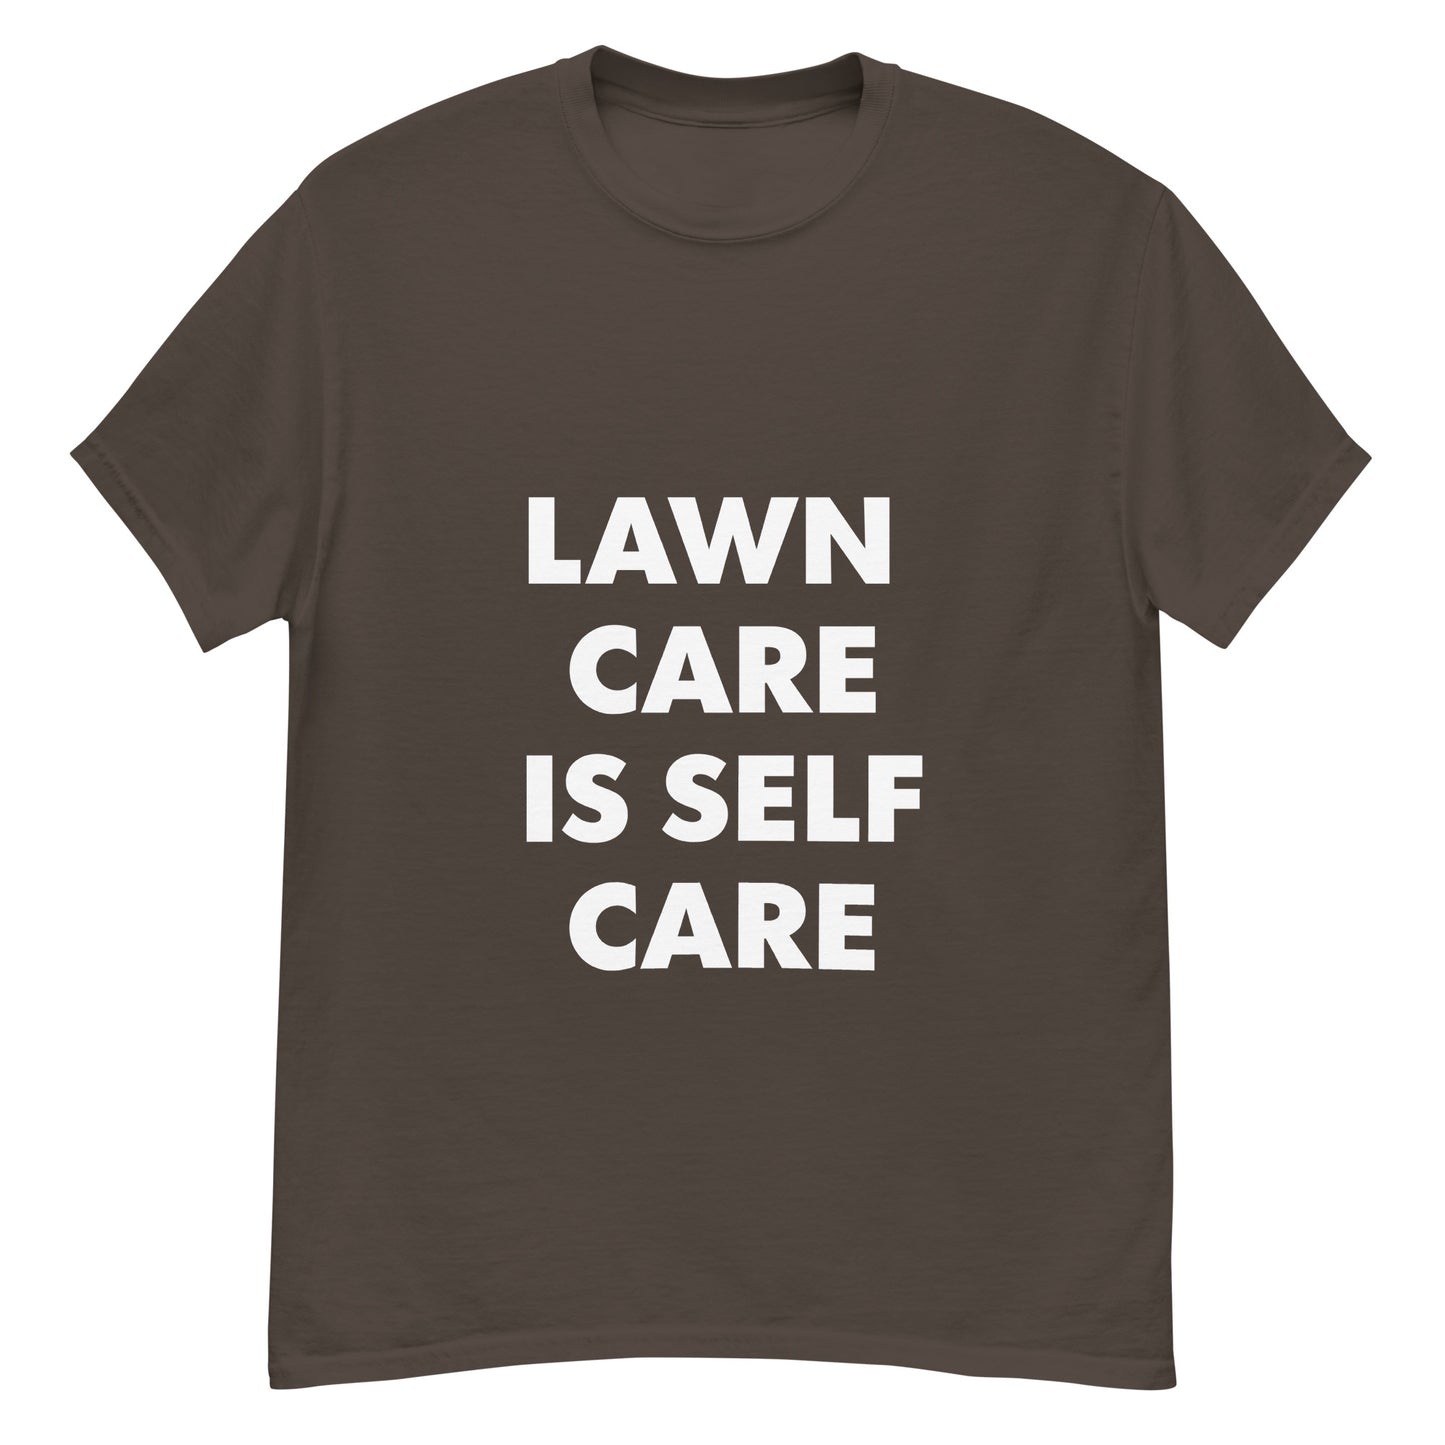 Lawn Care Is Self Care Printed Tshirt